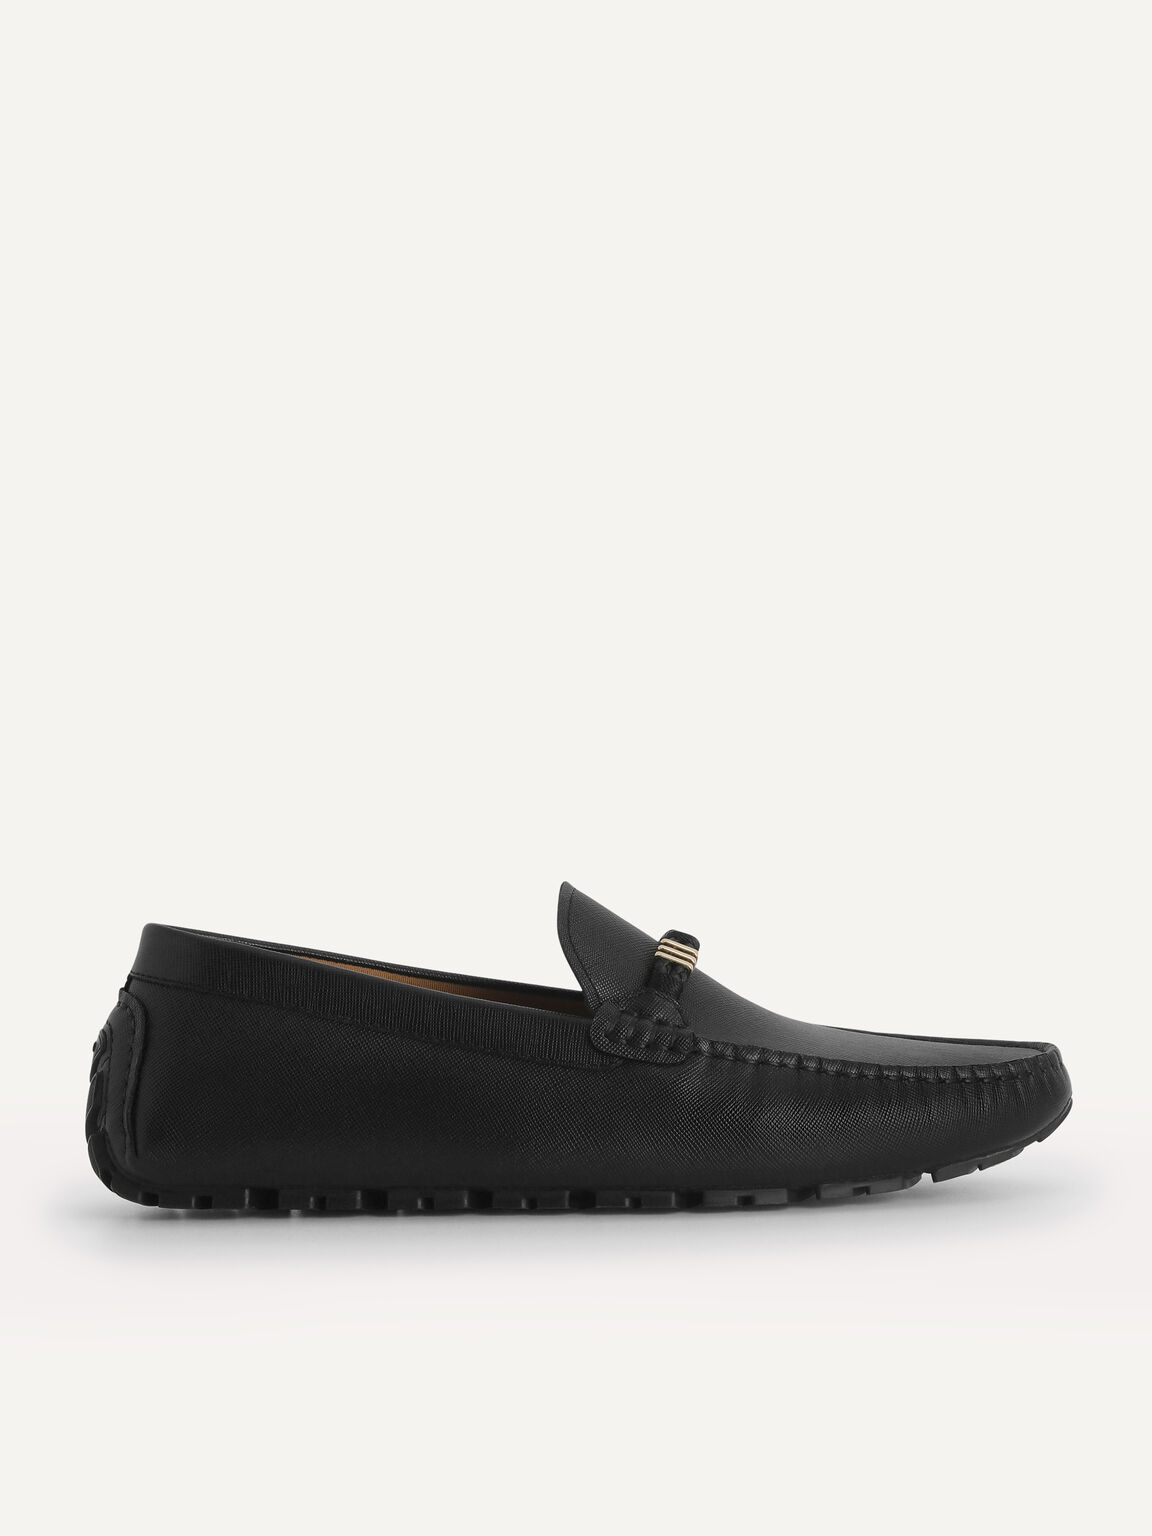 Leather Moccasins with Rope Detailing, Black